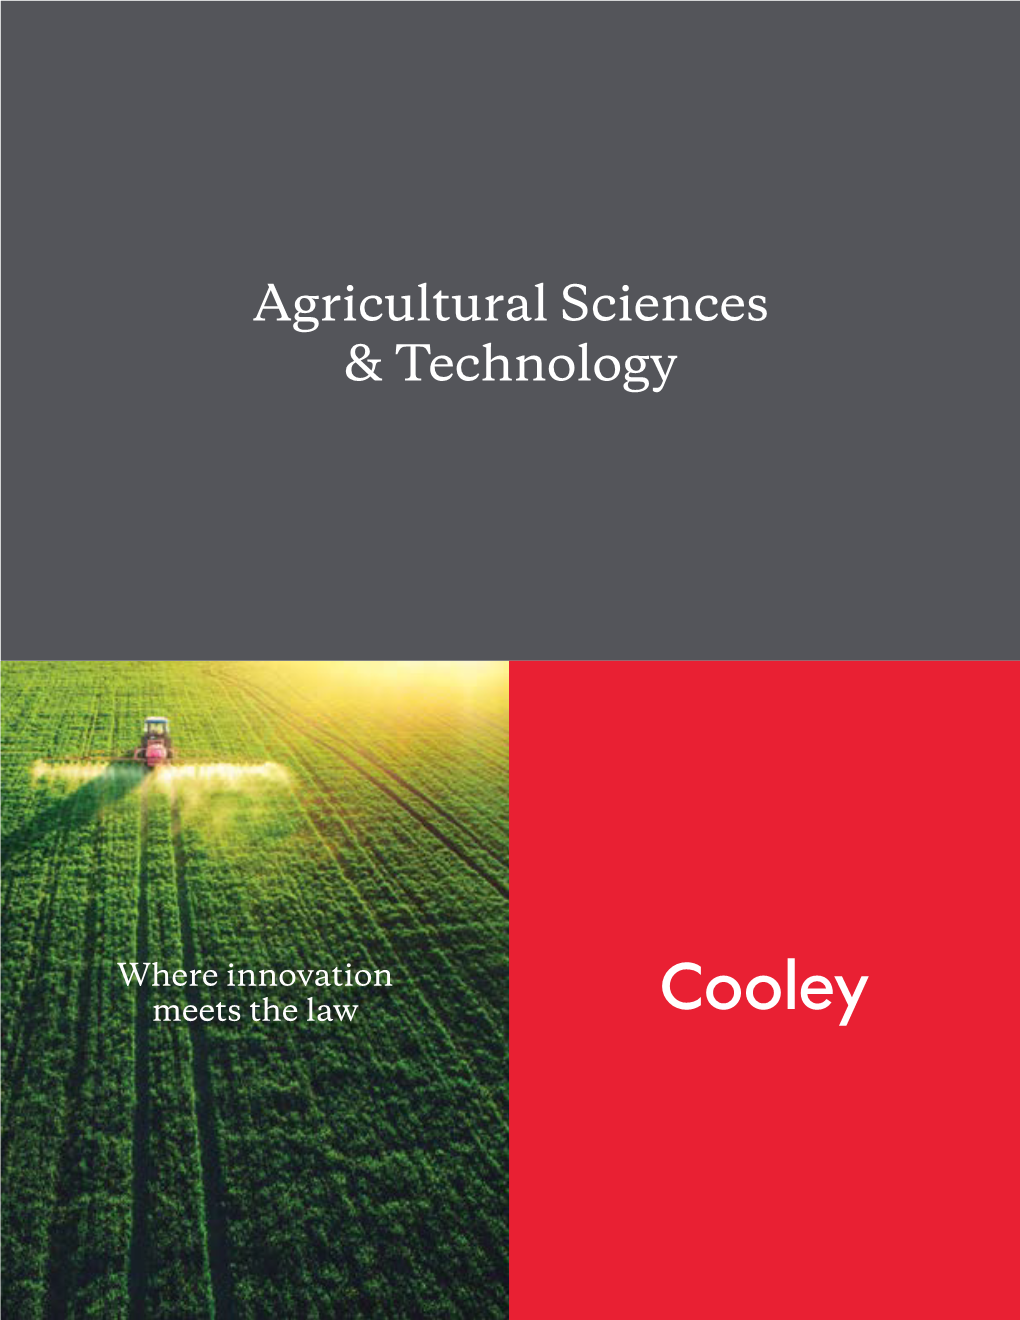 Agricultural Sciences & Technology